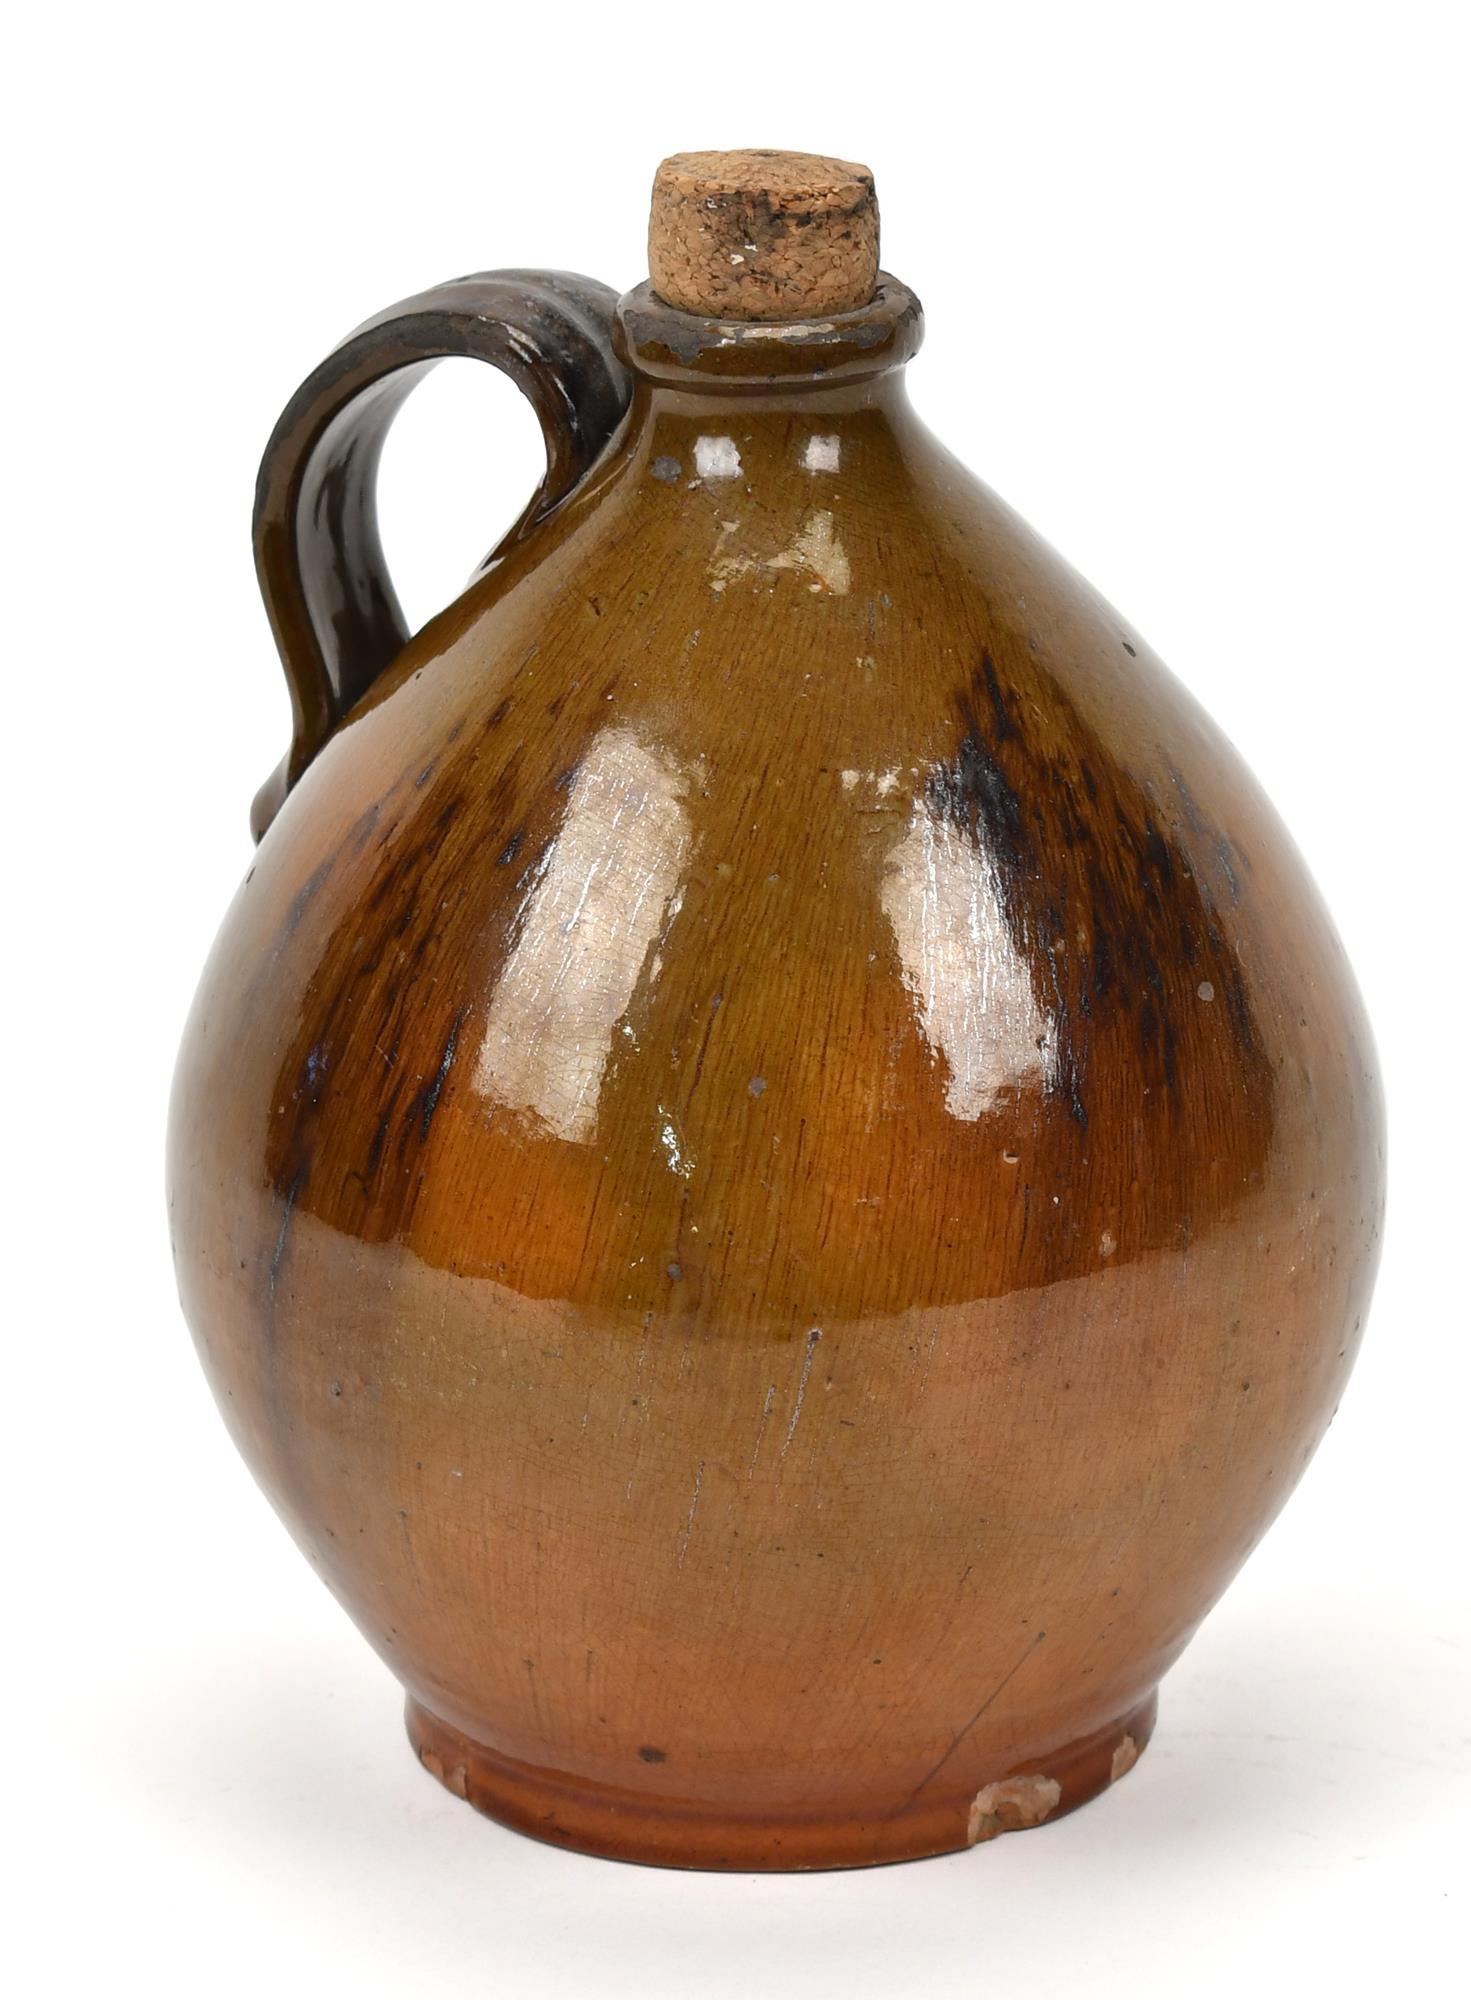 EARLY 19TH C. OVOID REDWARE JUG. A very